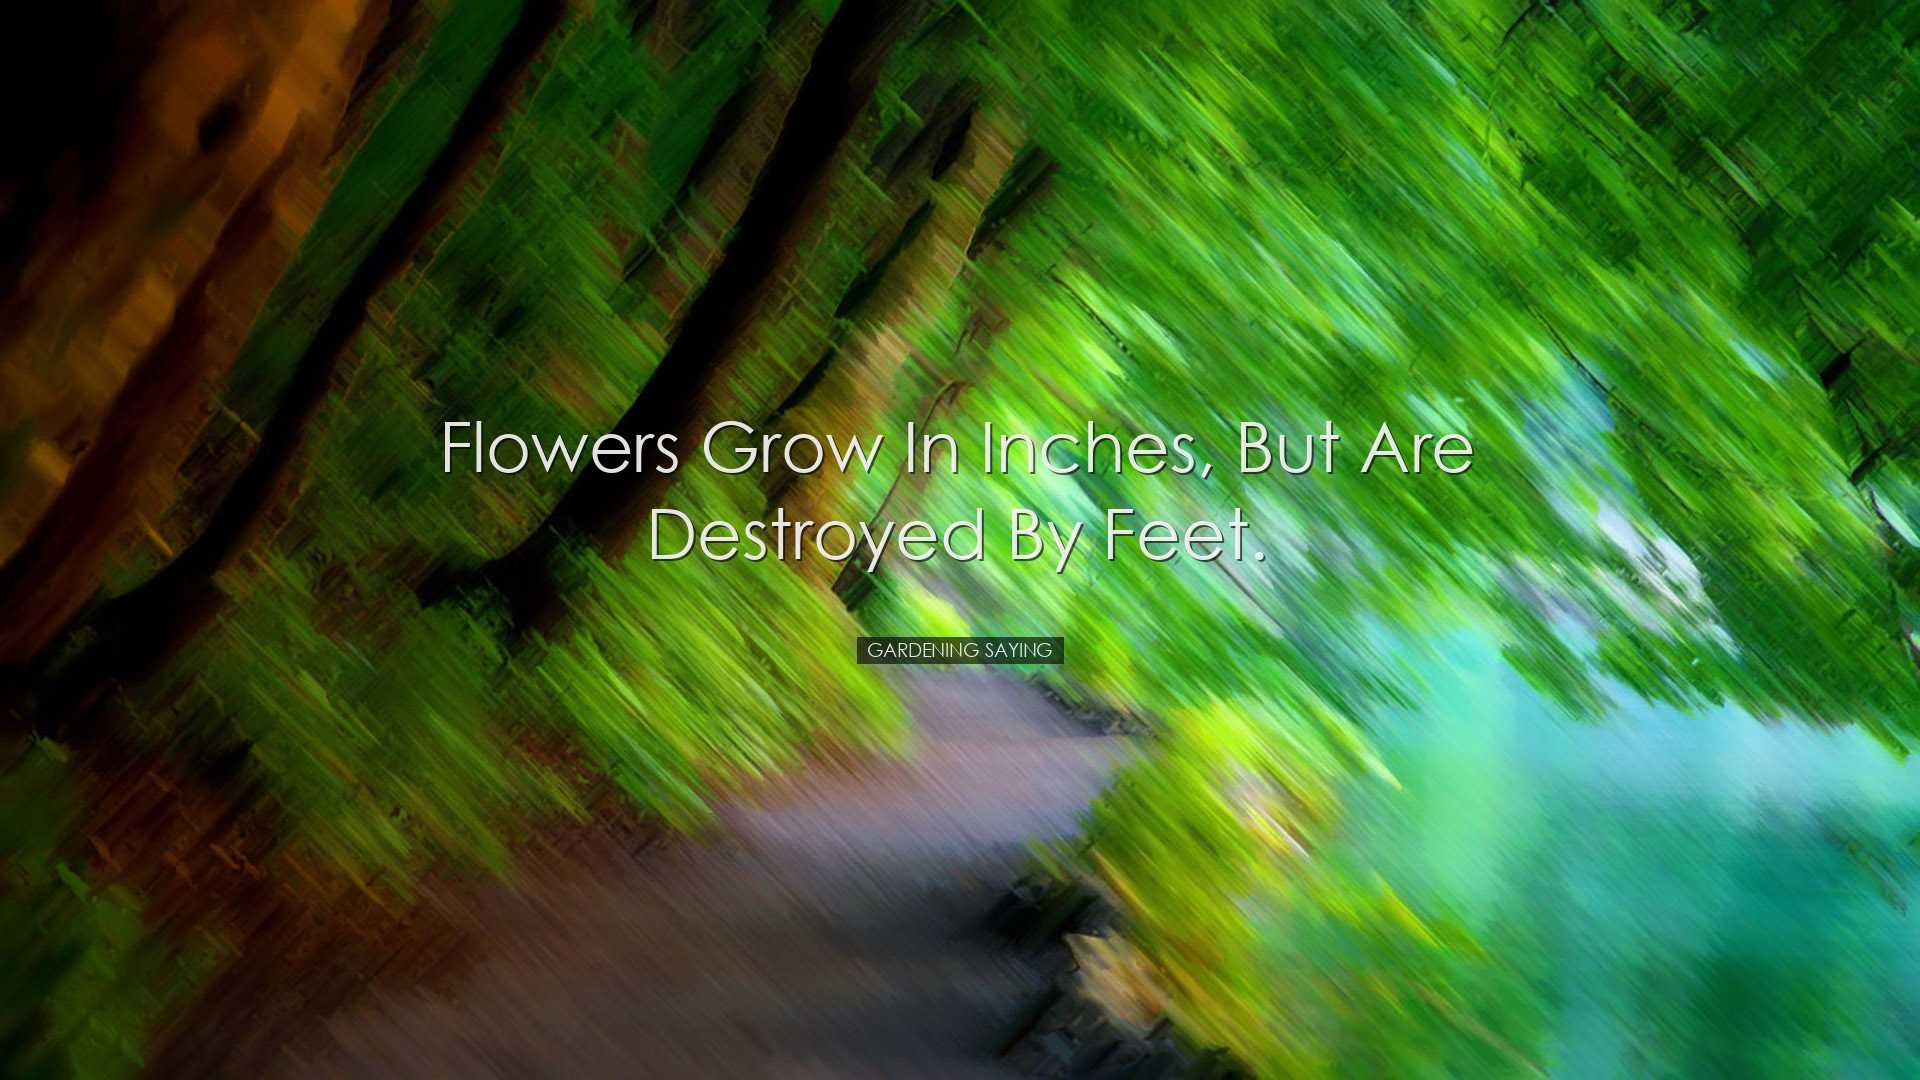 Flowers grow in inches, but are destroyed by feet. - Gardening Say